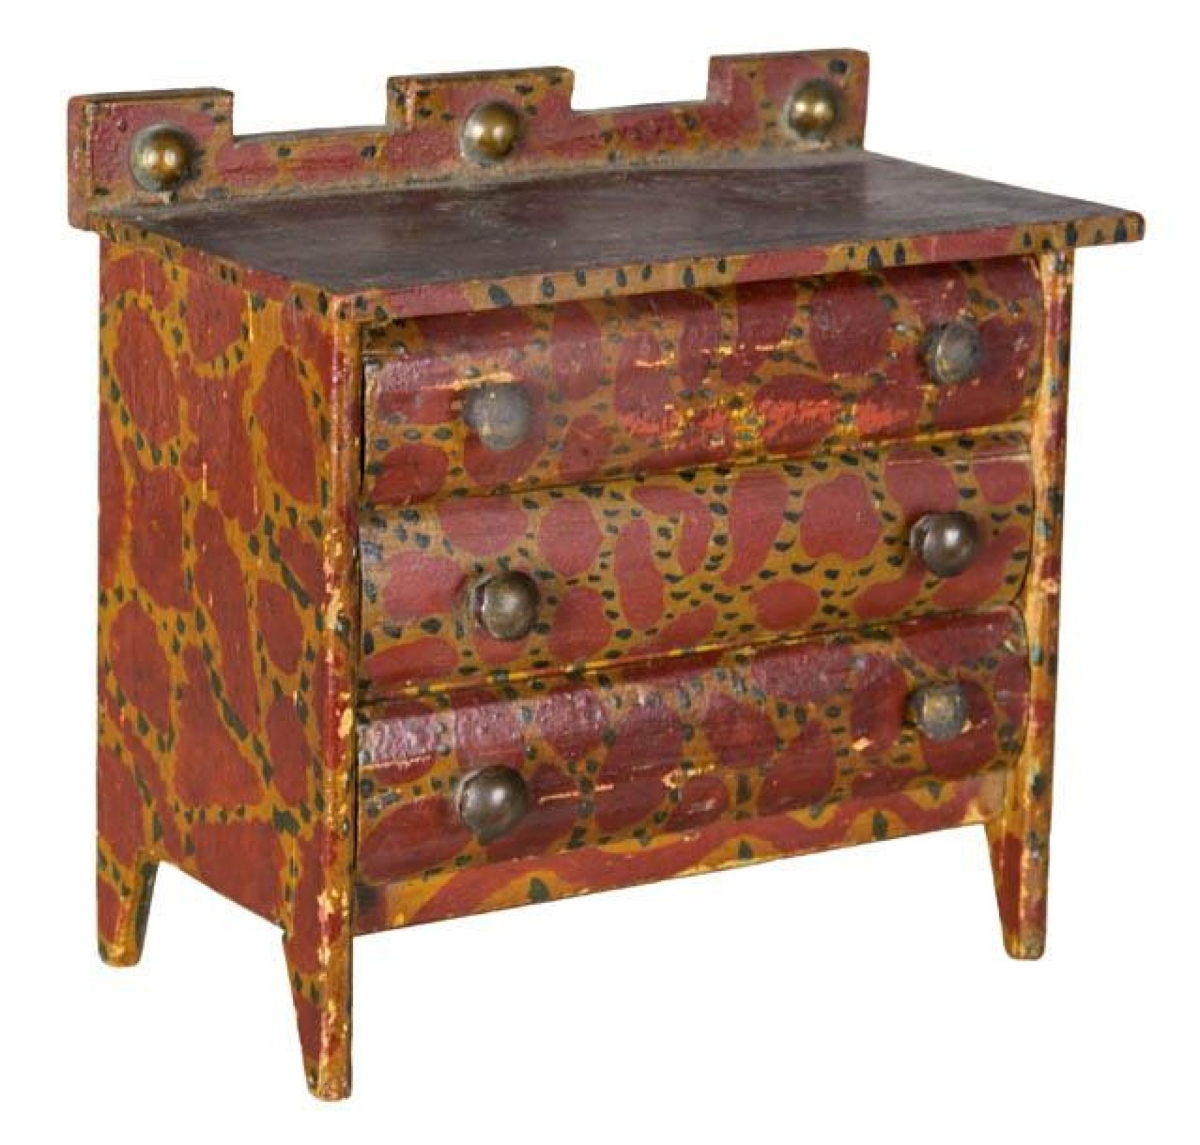 One of the major surprises of the day was this miniature pine bureau, 5¼ inches tall, which had been found in Vermont. It was decorated with red paint and exceptional snake-like graining over the red. The drawer fronts were beveled, and it had a rectangular backsplash. It was estimated at $1,400. A phone bidder competed with an internet bidder until it sold for $6,900 to the phone bidder.